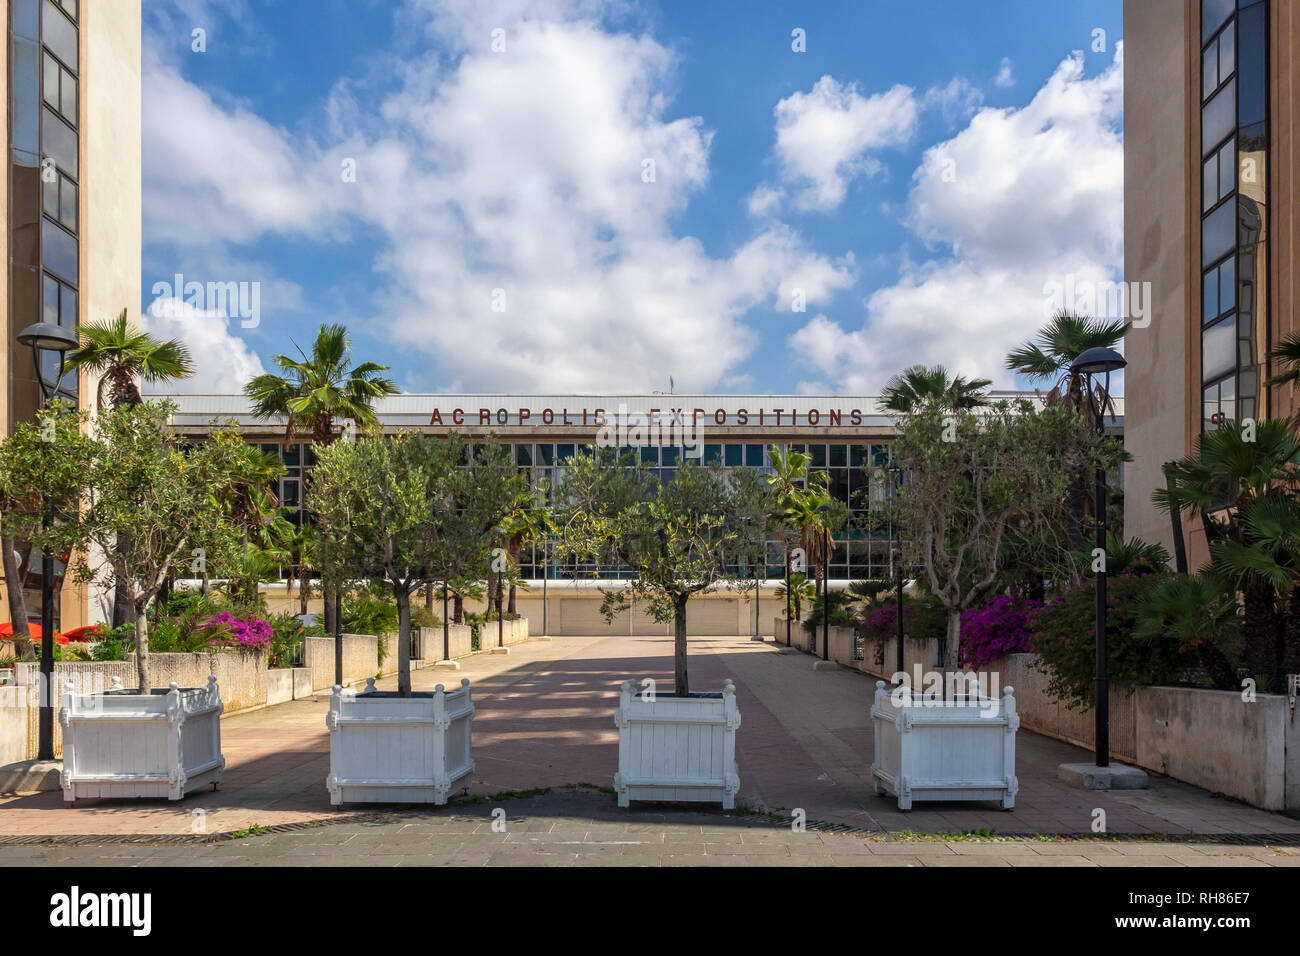 NICE, FRANCE - MAY 29, 2018:  Exterior view of Palais des Expositions Exhibition Centre Stock Photo